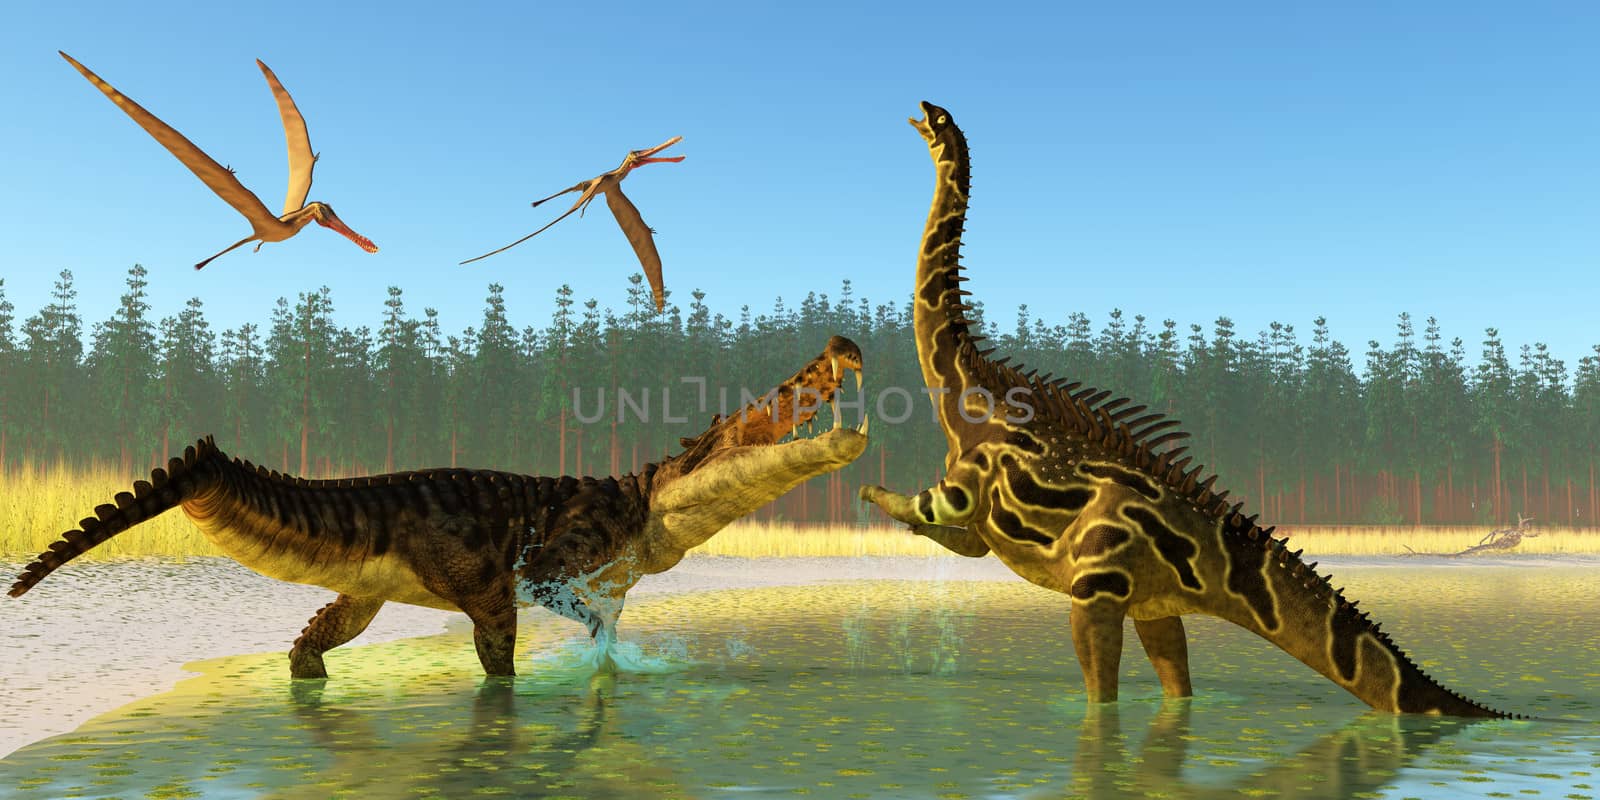 Two Anhanguera reptiles fly over as a Kaprosuchus marine reptile confronts an Agustinia dinosaur.